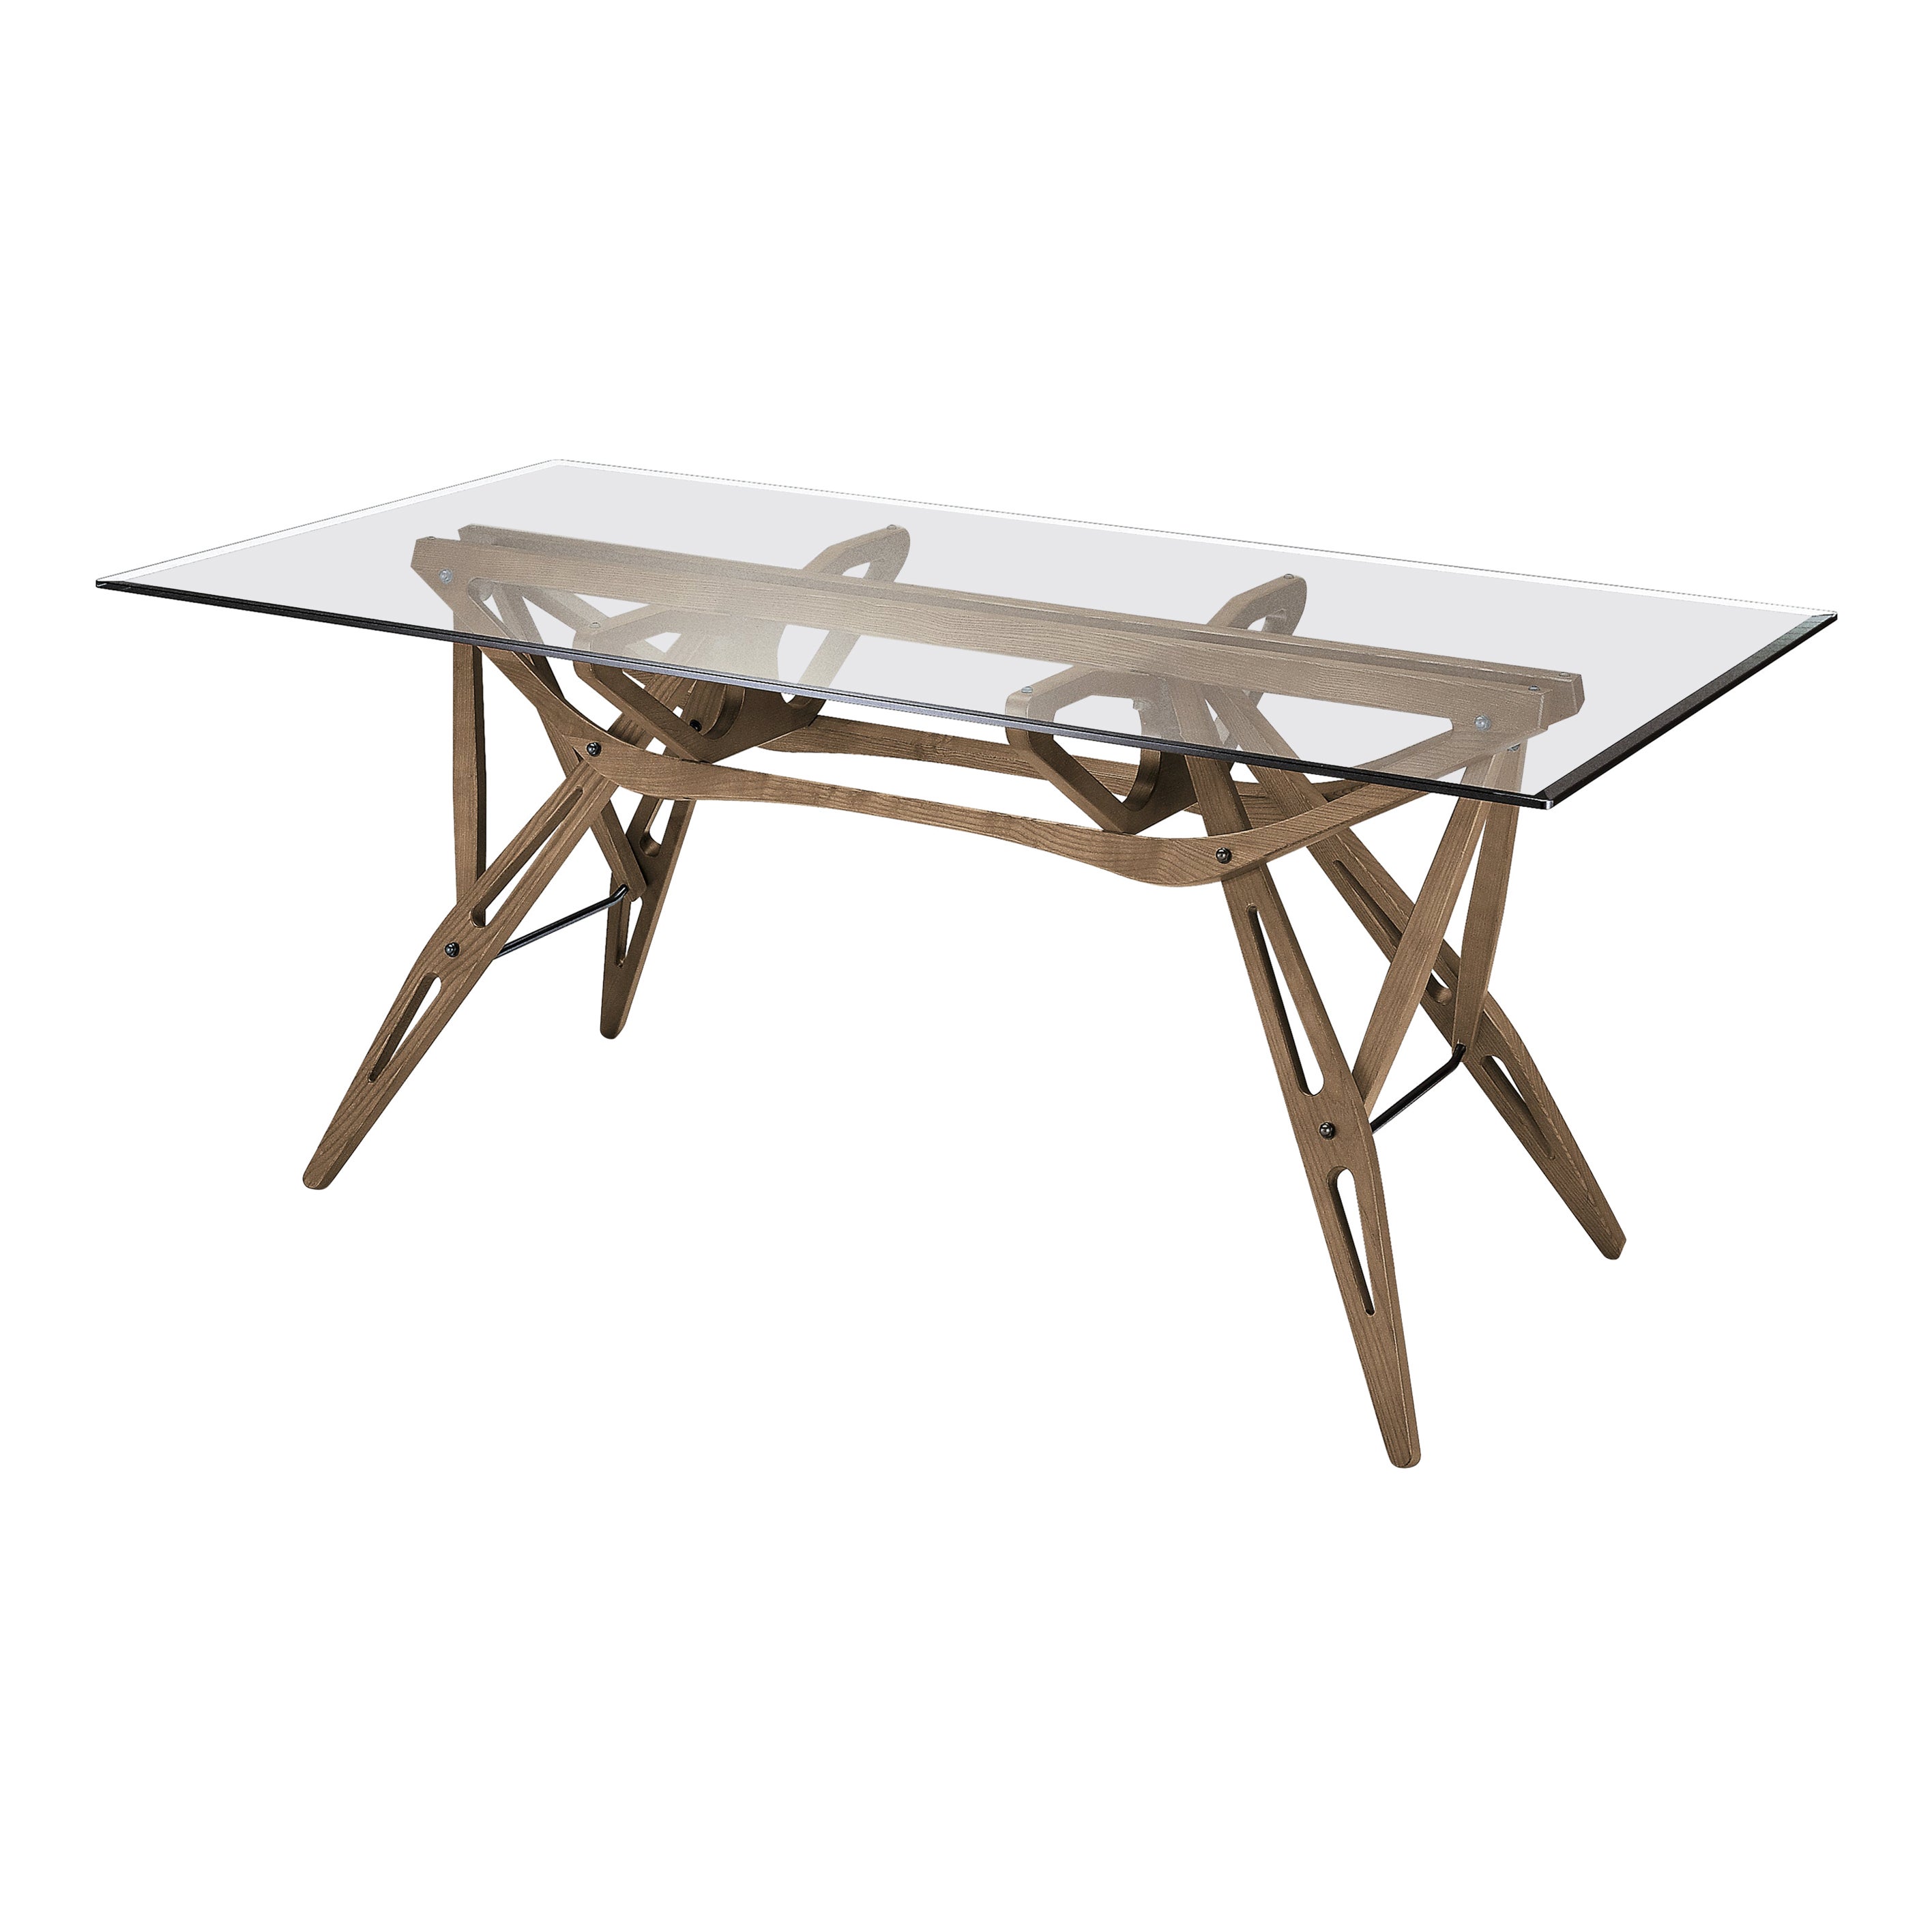 Zanotta Large Reale Table in Glass Top with Bevelled Edges with Walnut Frame